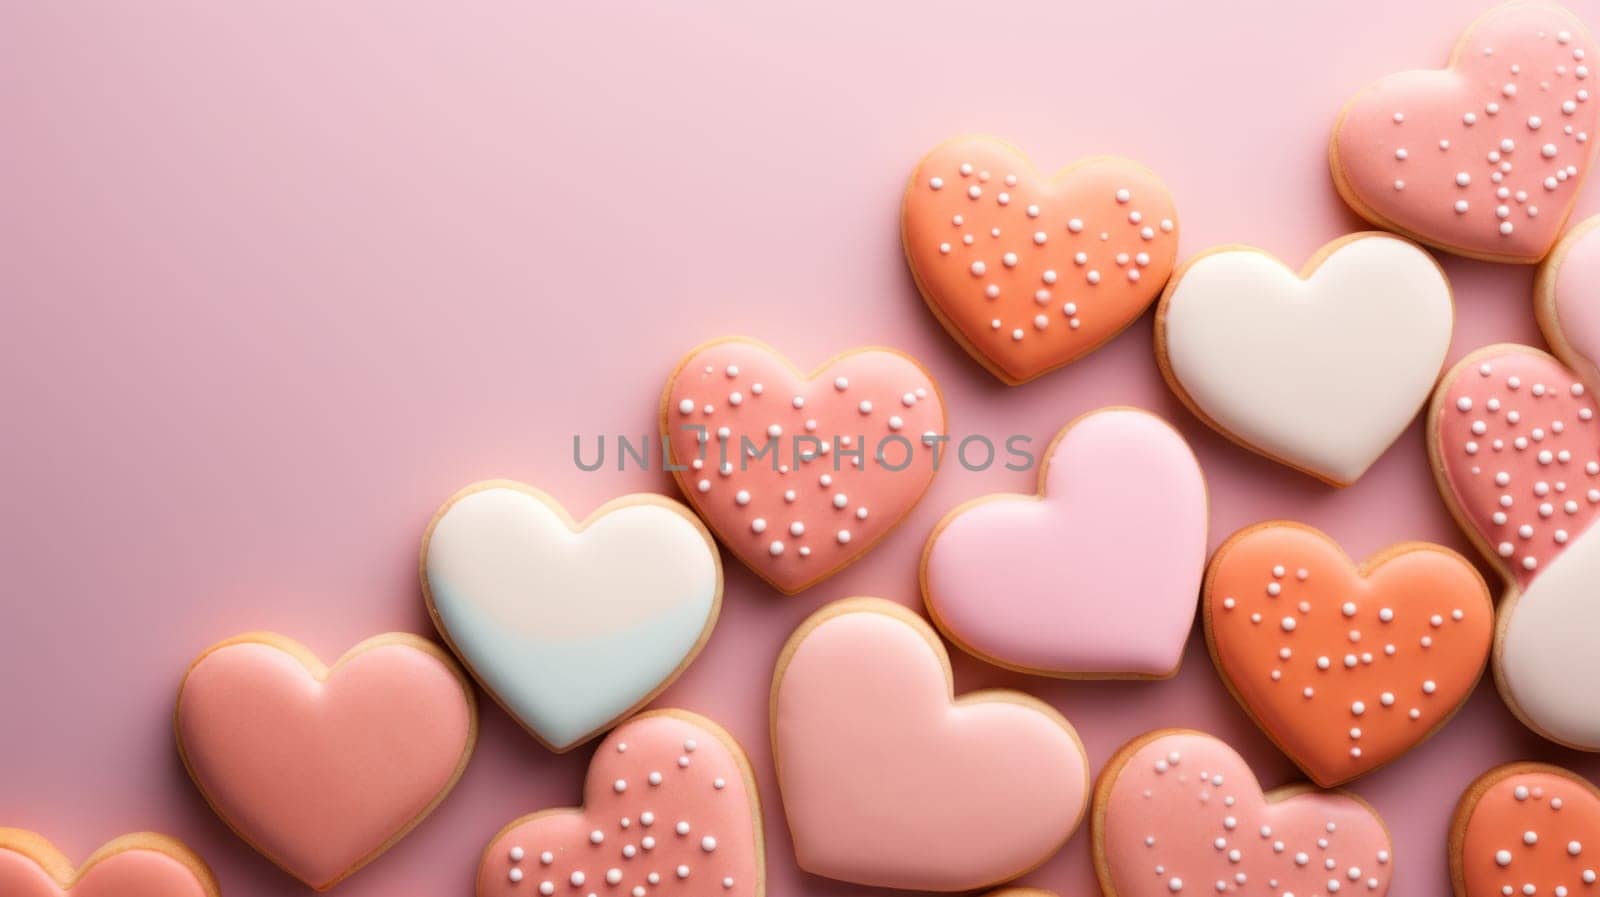 A bunch of heart shaped cookies on a pink background